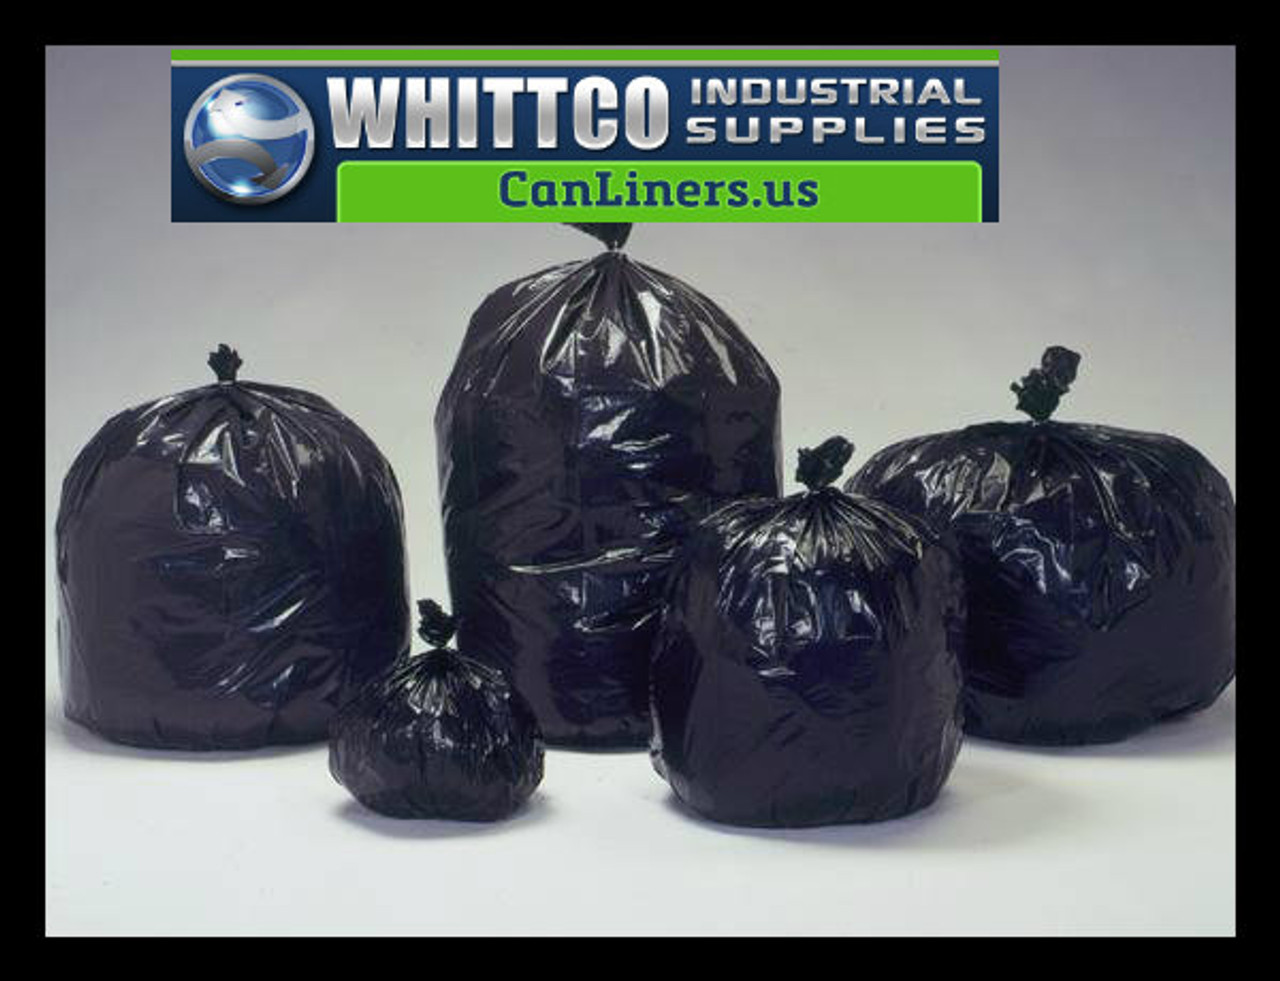 15 Gallon, 24 x 33 - 8 Micron Can Liner / Trash Bags, Clear, 1000/Case